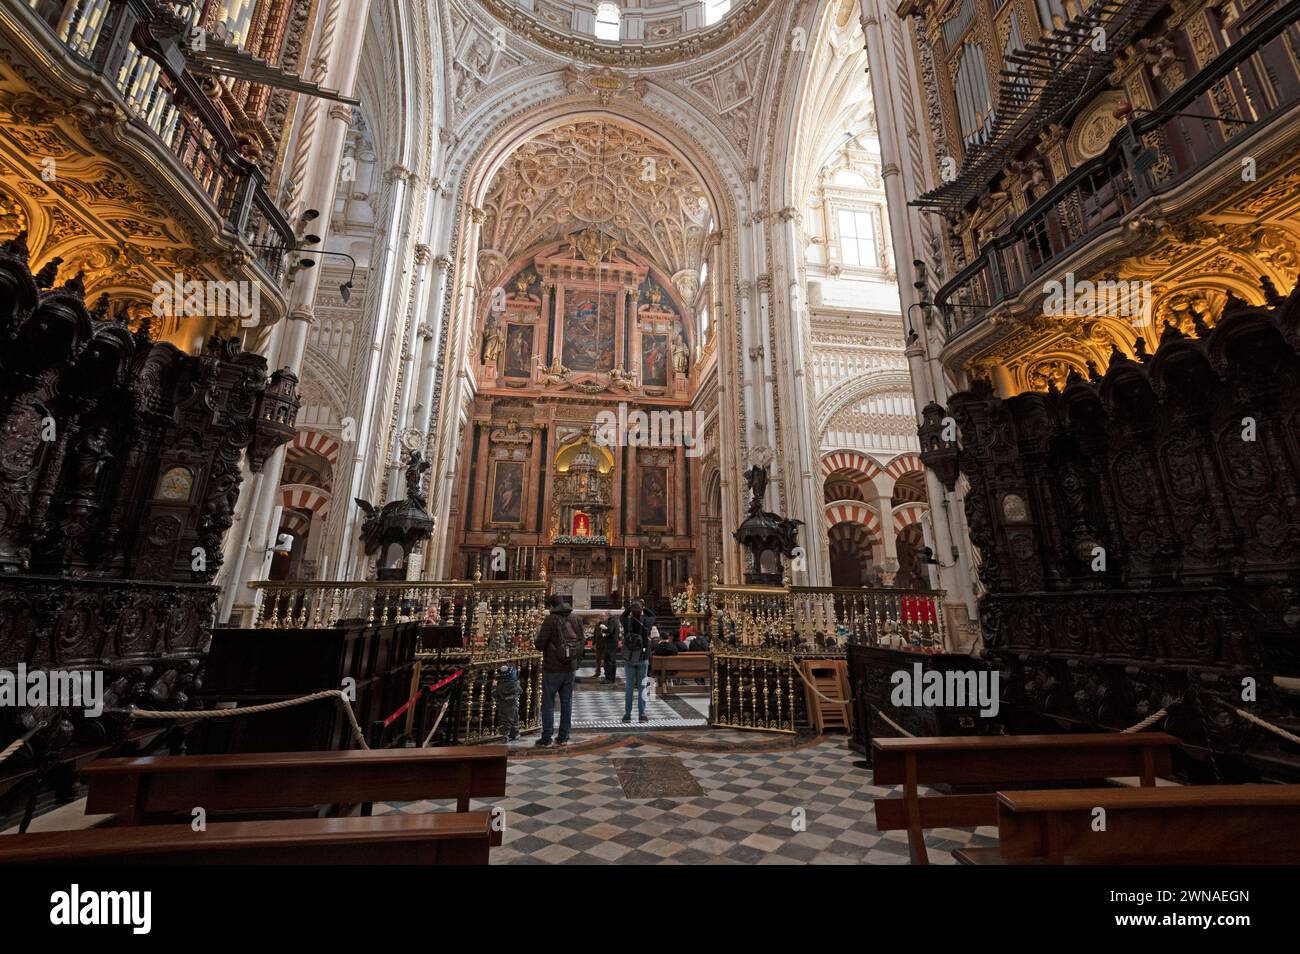 Mosque/ Cathedral of Cordoba  From the dark Choir stalls of low and high armchairs towards the alter with its massive backdrop made of coloured marble Stock Photo